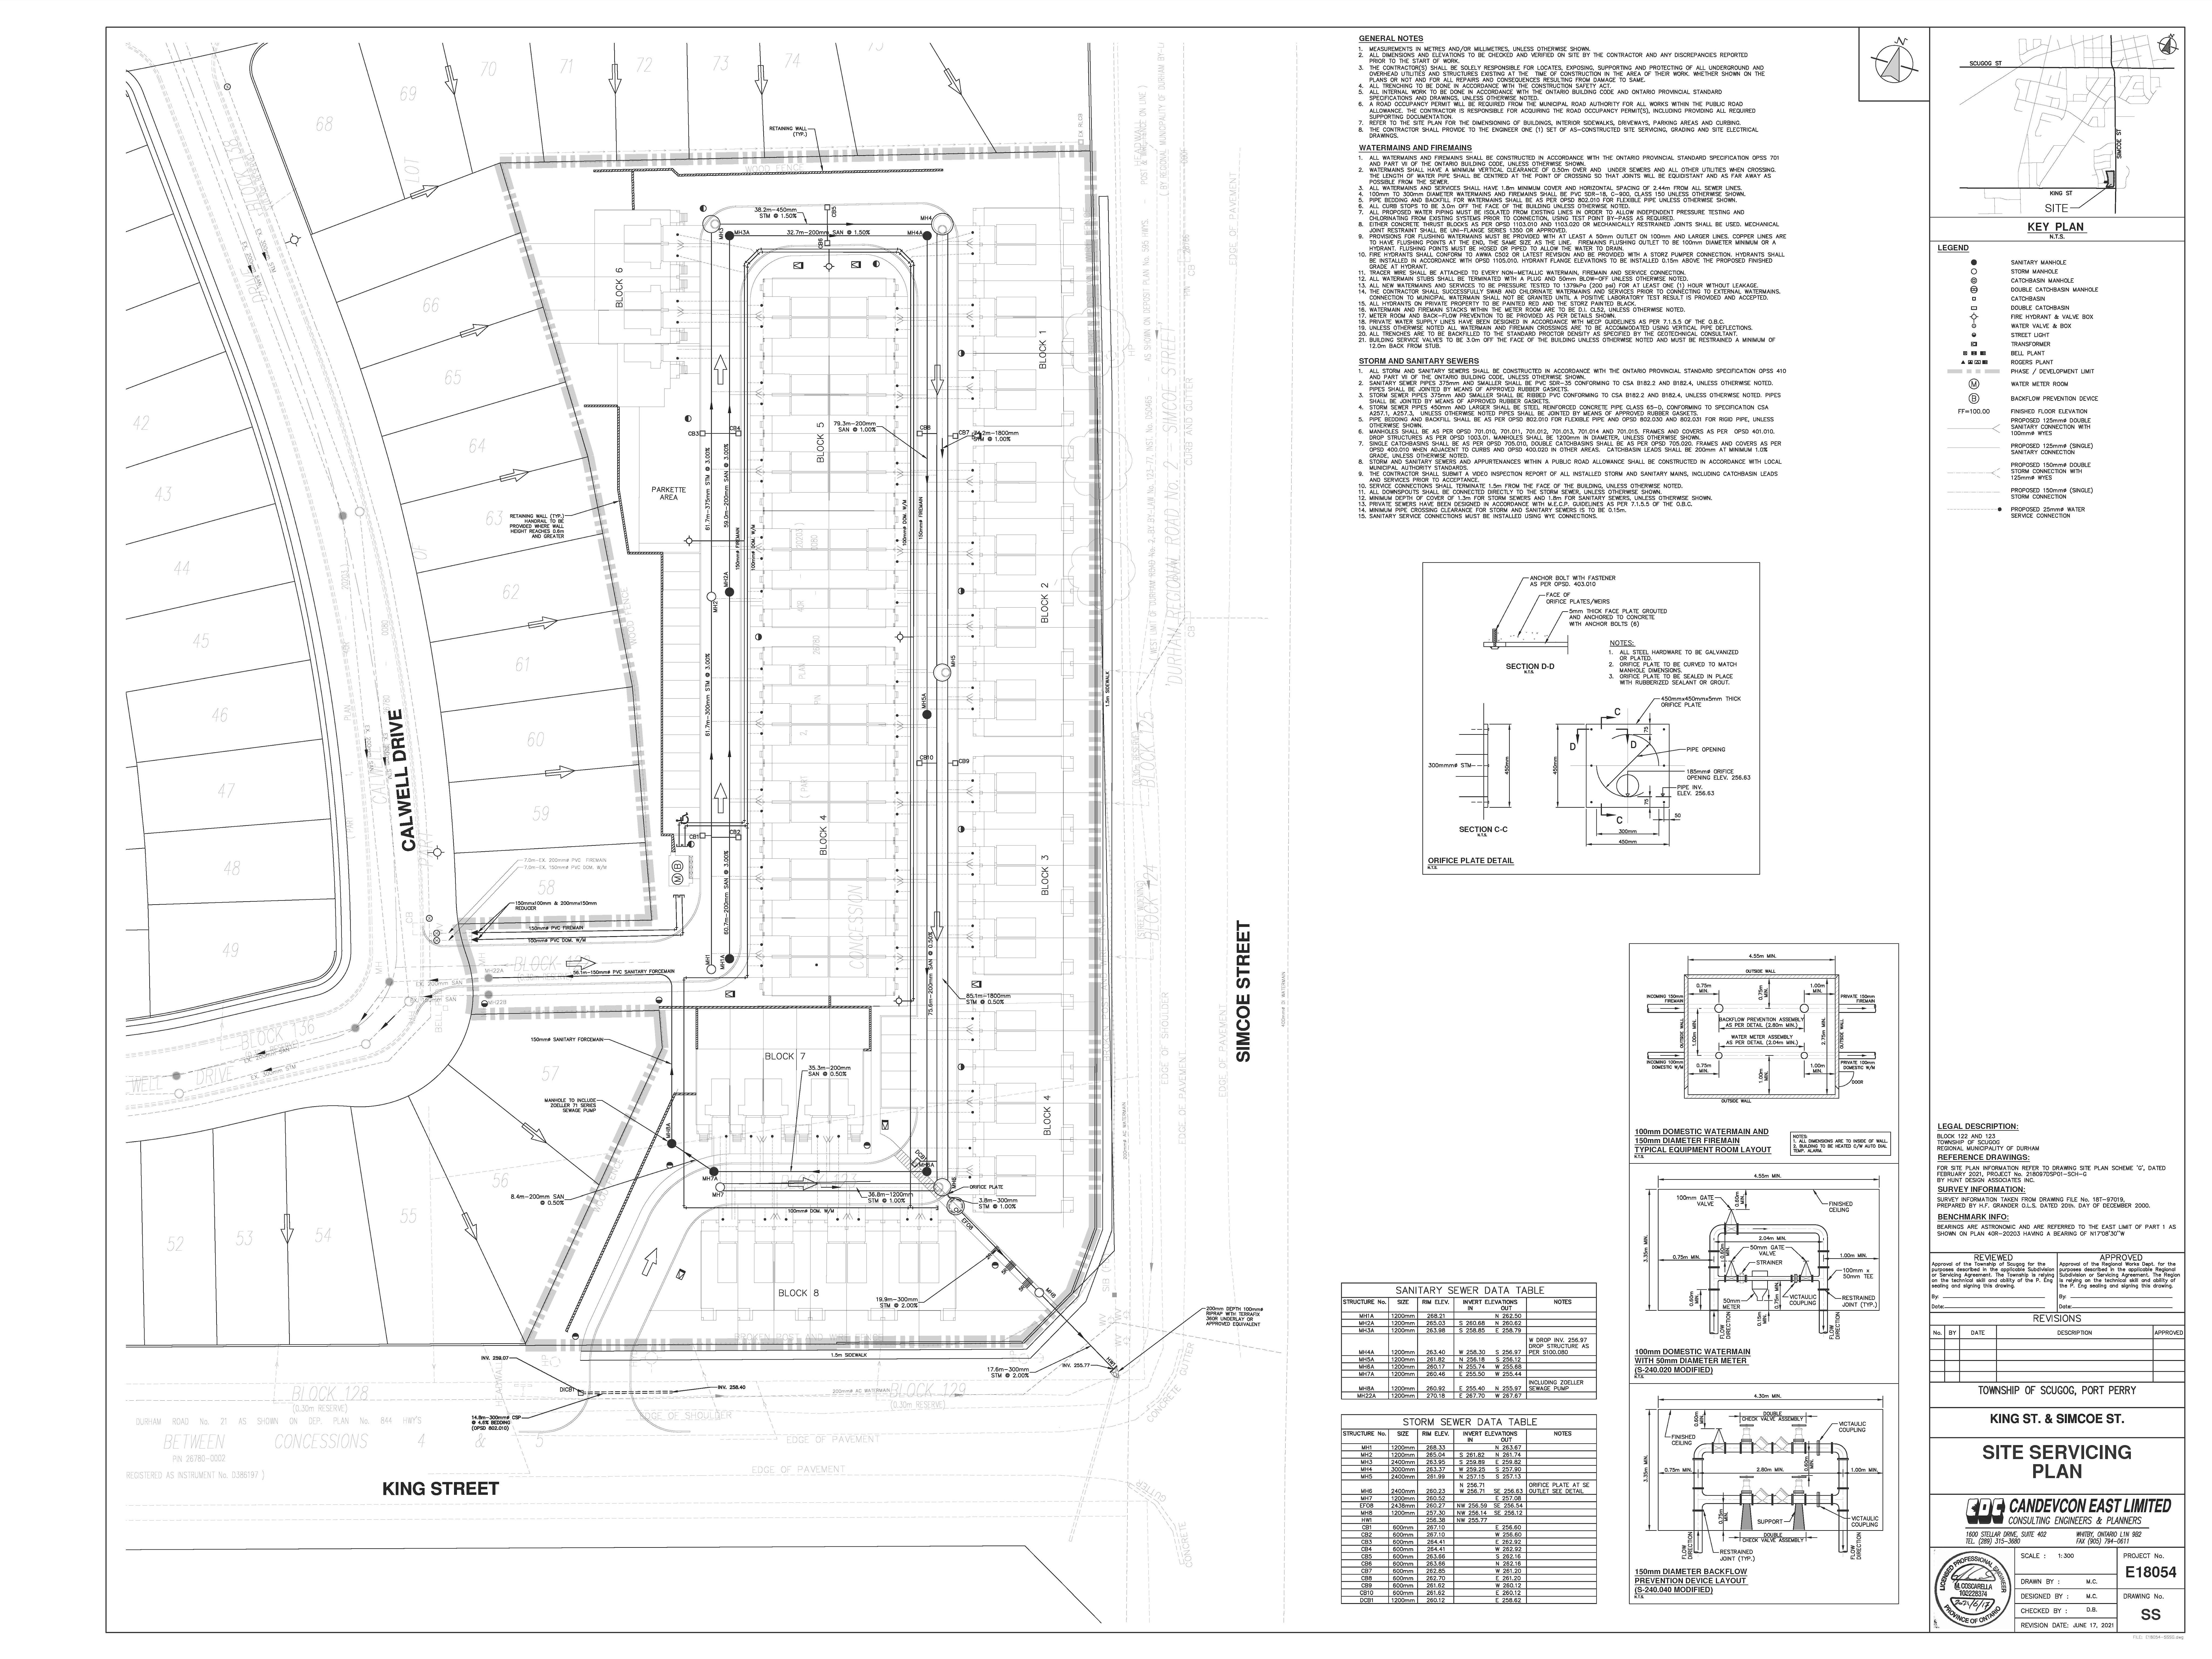 Proposed Site Servicing Plan